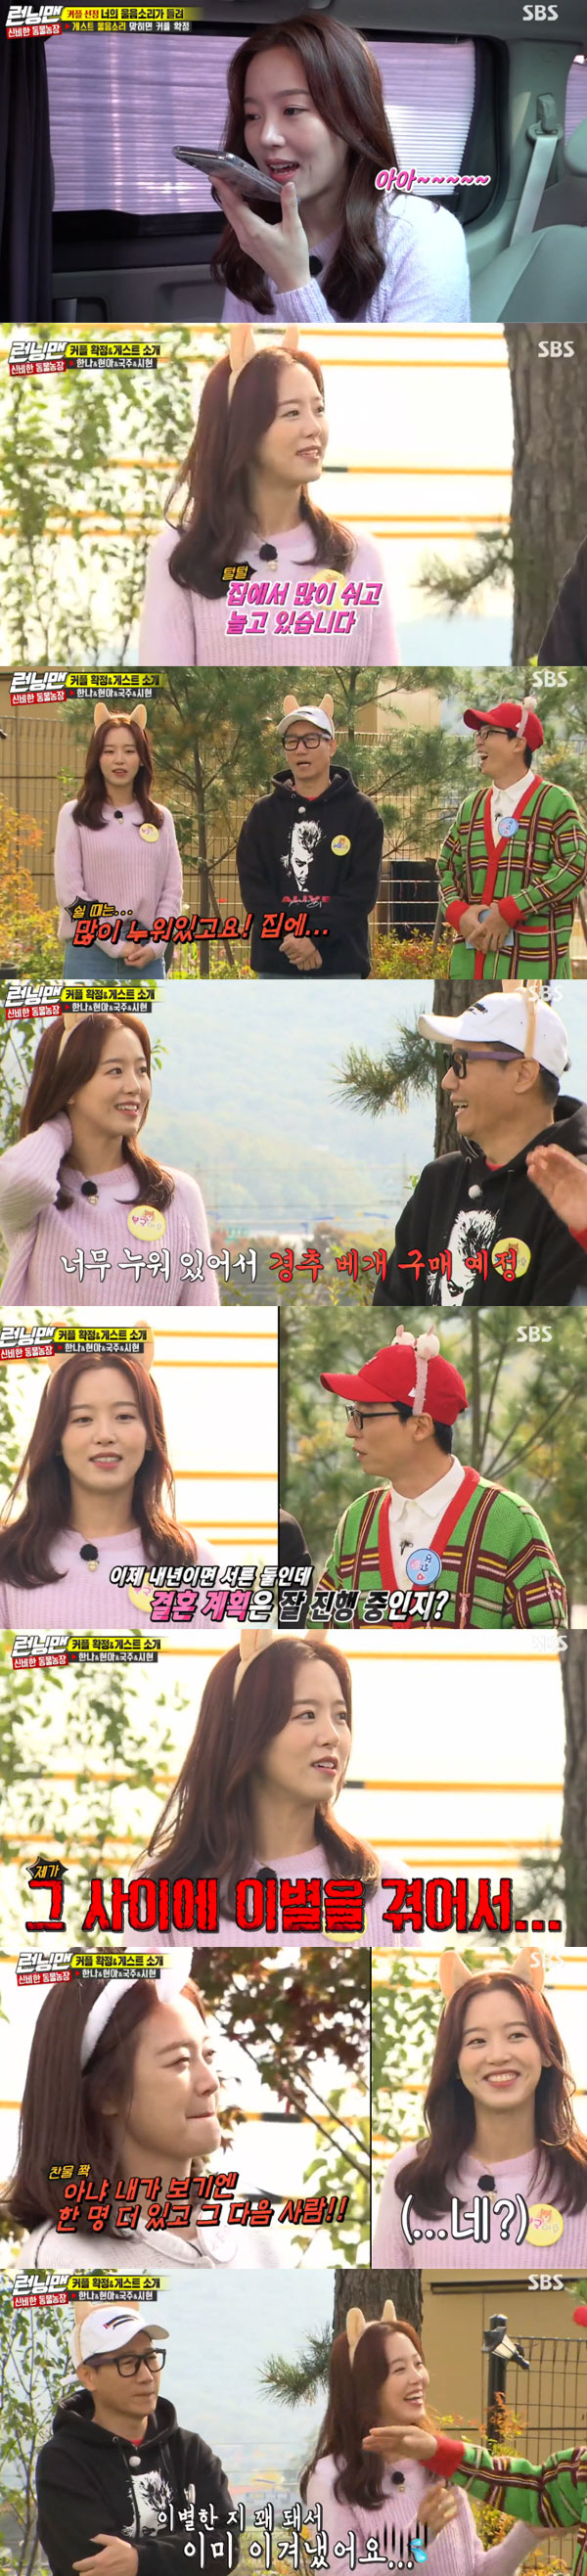 Running Man Family Kang Han-Na has revealed the recent situation of candidness.On SBS Running Man broadcasted on the 10th, Family Kang Han-Na, Hyun-ah, Lee Kook-ju and Evergloo Sihyun appeared as guests again in a year.On this day, Kang Han-Na was pleased to meet with Running Man members for a long time.So Yoo Jae-Suk said, I have been active in the drama these days. Kang Han-Na replied, I am resting these days without any hesitation, and made the members laugh.Asked, What did you rest for? Kang Han-Na laughed, saying, I was lying down these days. I think I should buy a cervical pillow because I am lying too much.At this time, Yoo Jae-Suk said, I interviewed Im married at thirty-two, is it going on?Kang Han-Na then confessed frankly that she made an appearance on Running Man in a year, and that she had a breakup in the meantime.Haha said, I will meet the last person now, but Jeon So-min said, No, I see one more person and the next person.In an unexpected recent situation, the members and guests conveyed a talk about overcoming various separations to comfort Kang Han-Na, but Kang Han-Na said, It is not so hard.I overcame the farewell, he said, and could not hide his embarrassment.